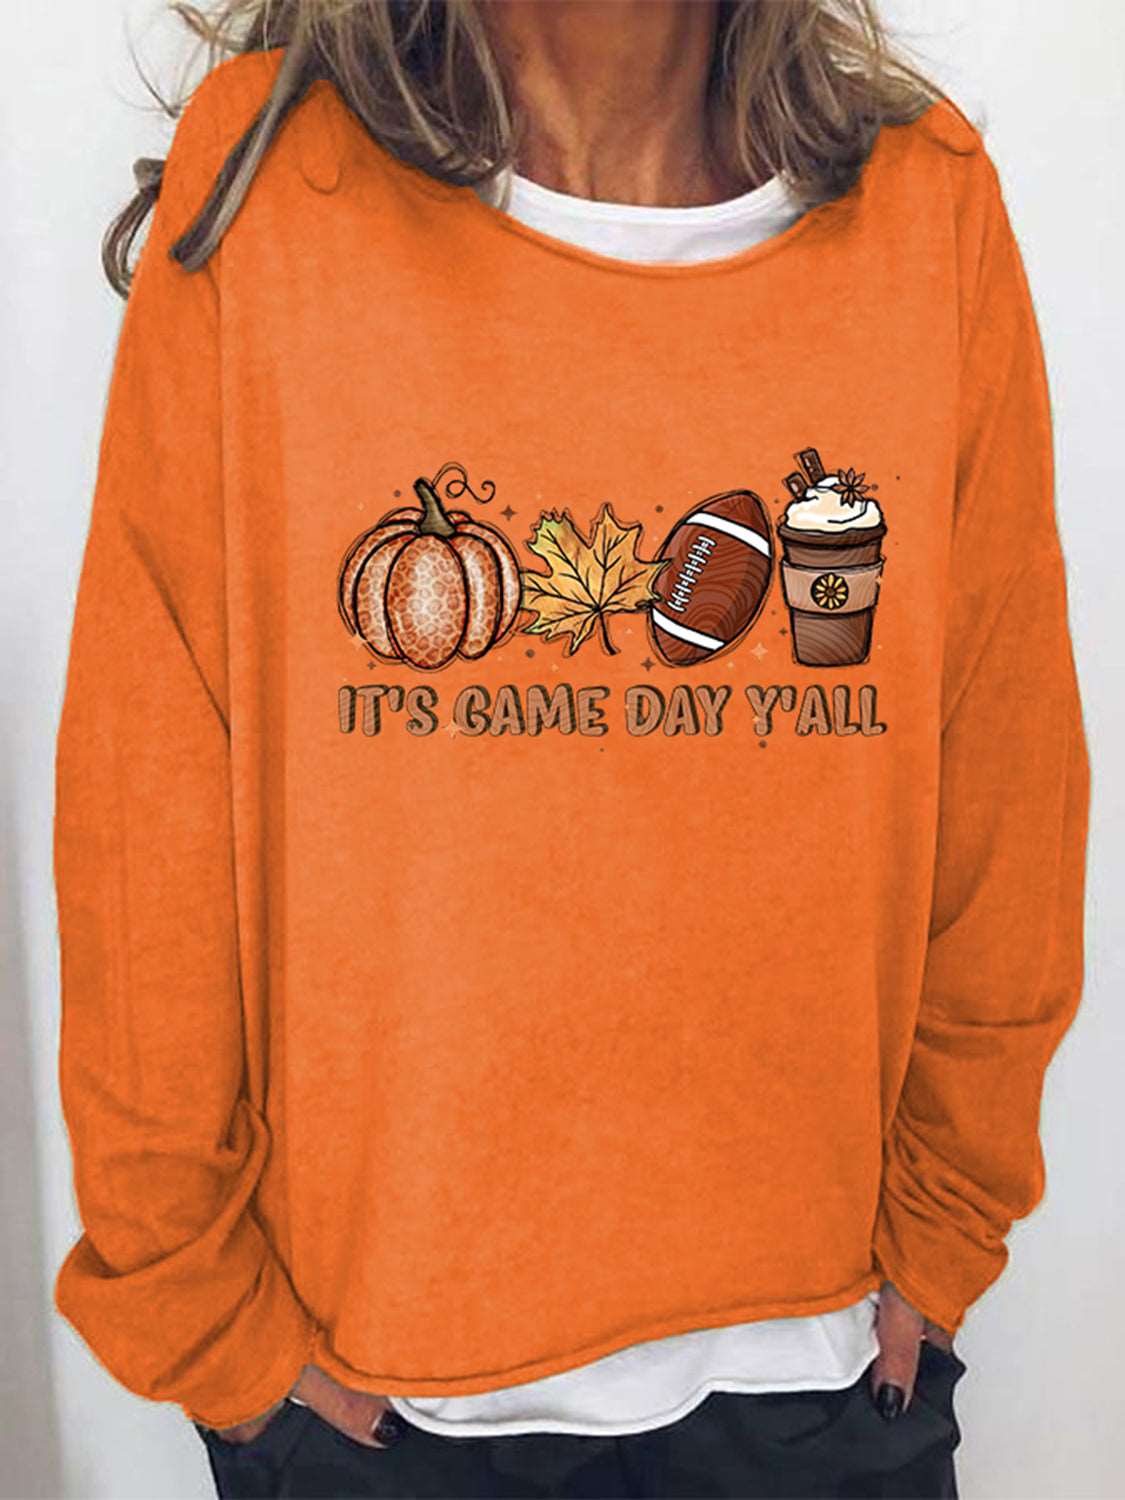 Full Size IT'S GAME DAY Y'ALL Graphic Sweatshirt (5 Colors)  Krazy Heart Designs Boutique Orange S 